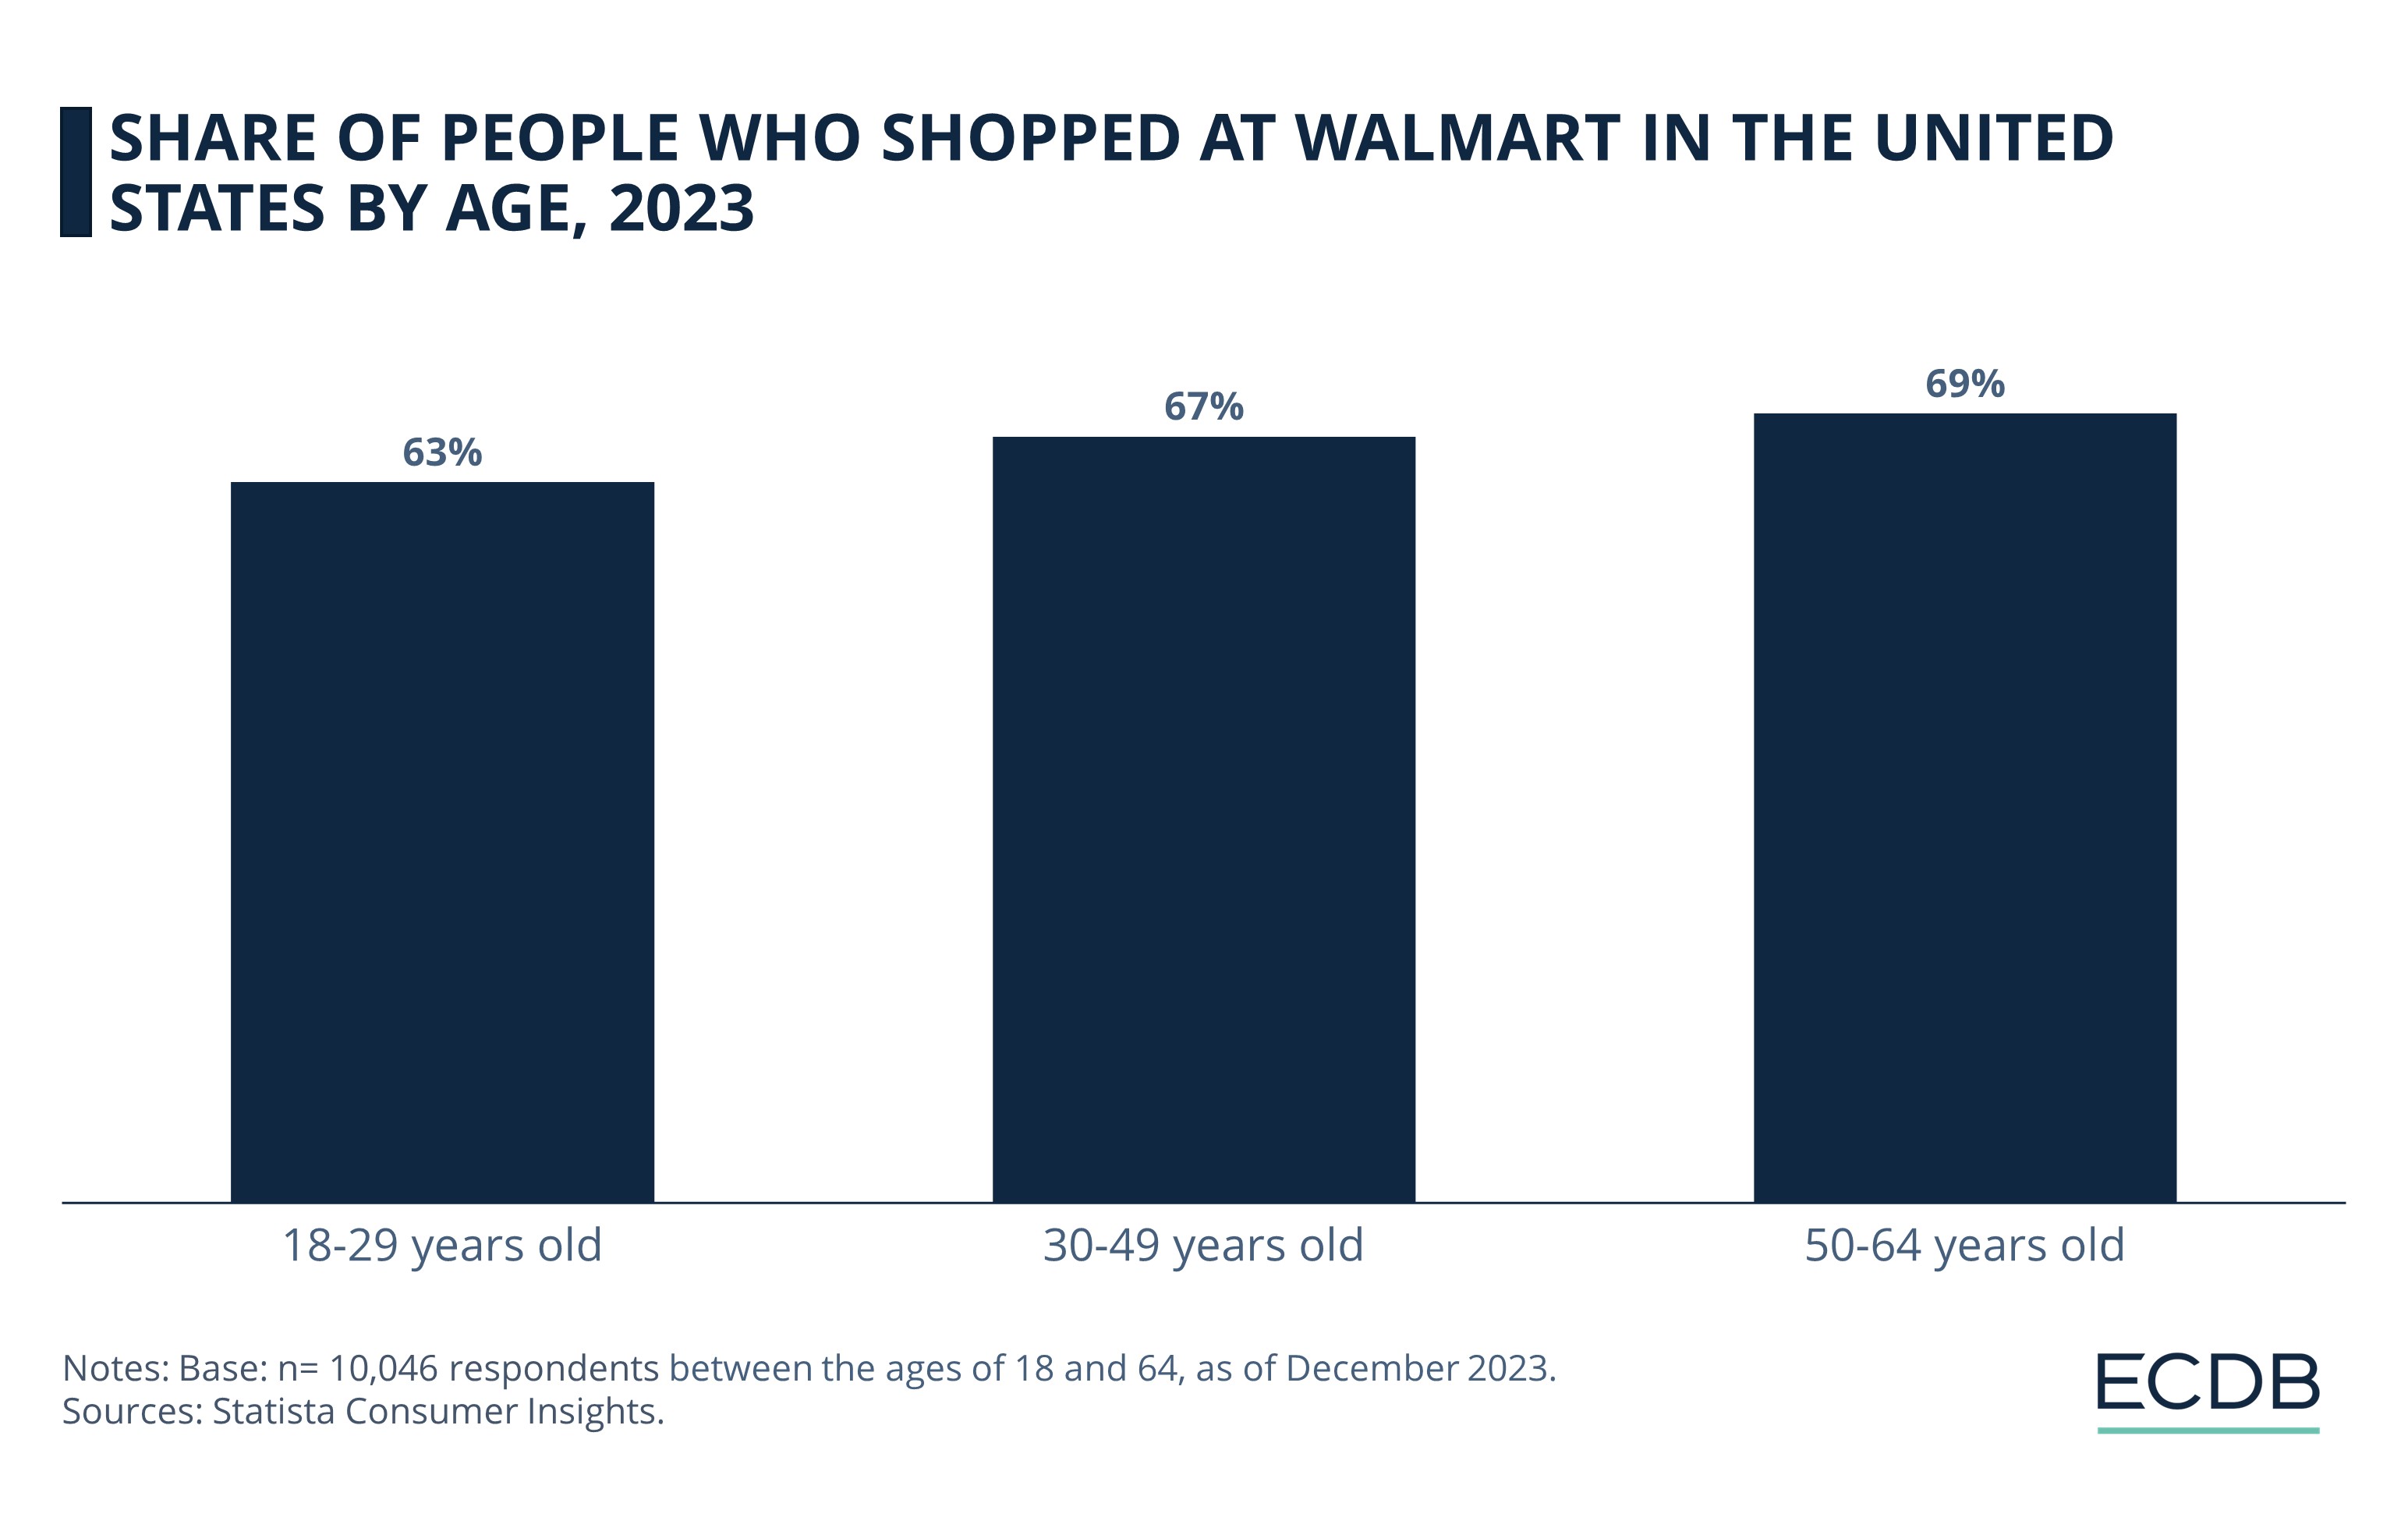 Share of People Who Shopped at Walmart in the United States by Age, 2023